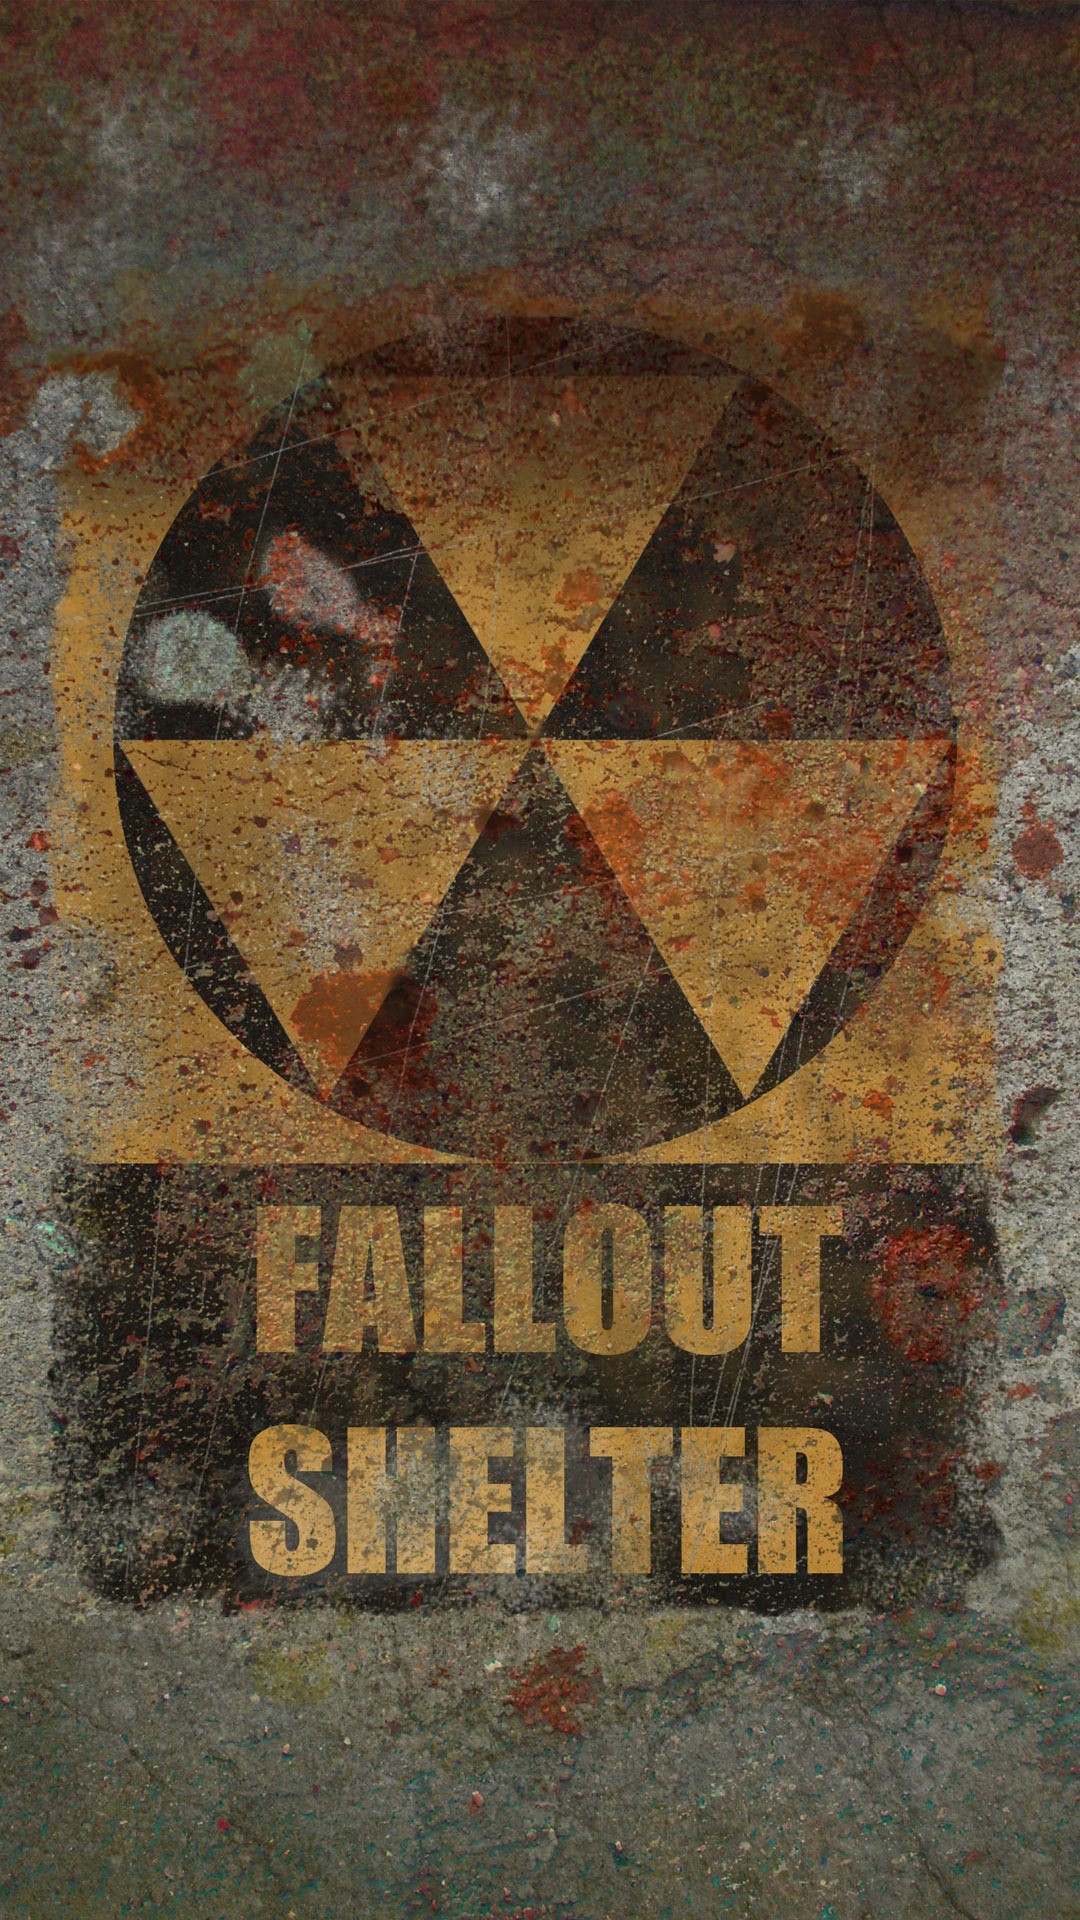 18 fallout 4 wallpapers for mobile! fallout 4 / fo4 mods on fallout mobile wallpapers